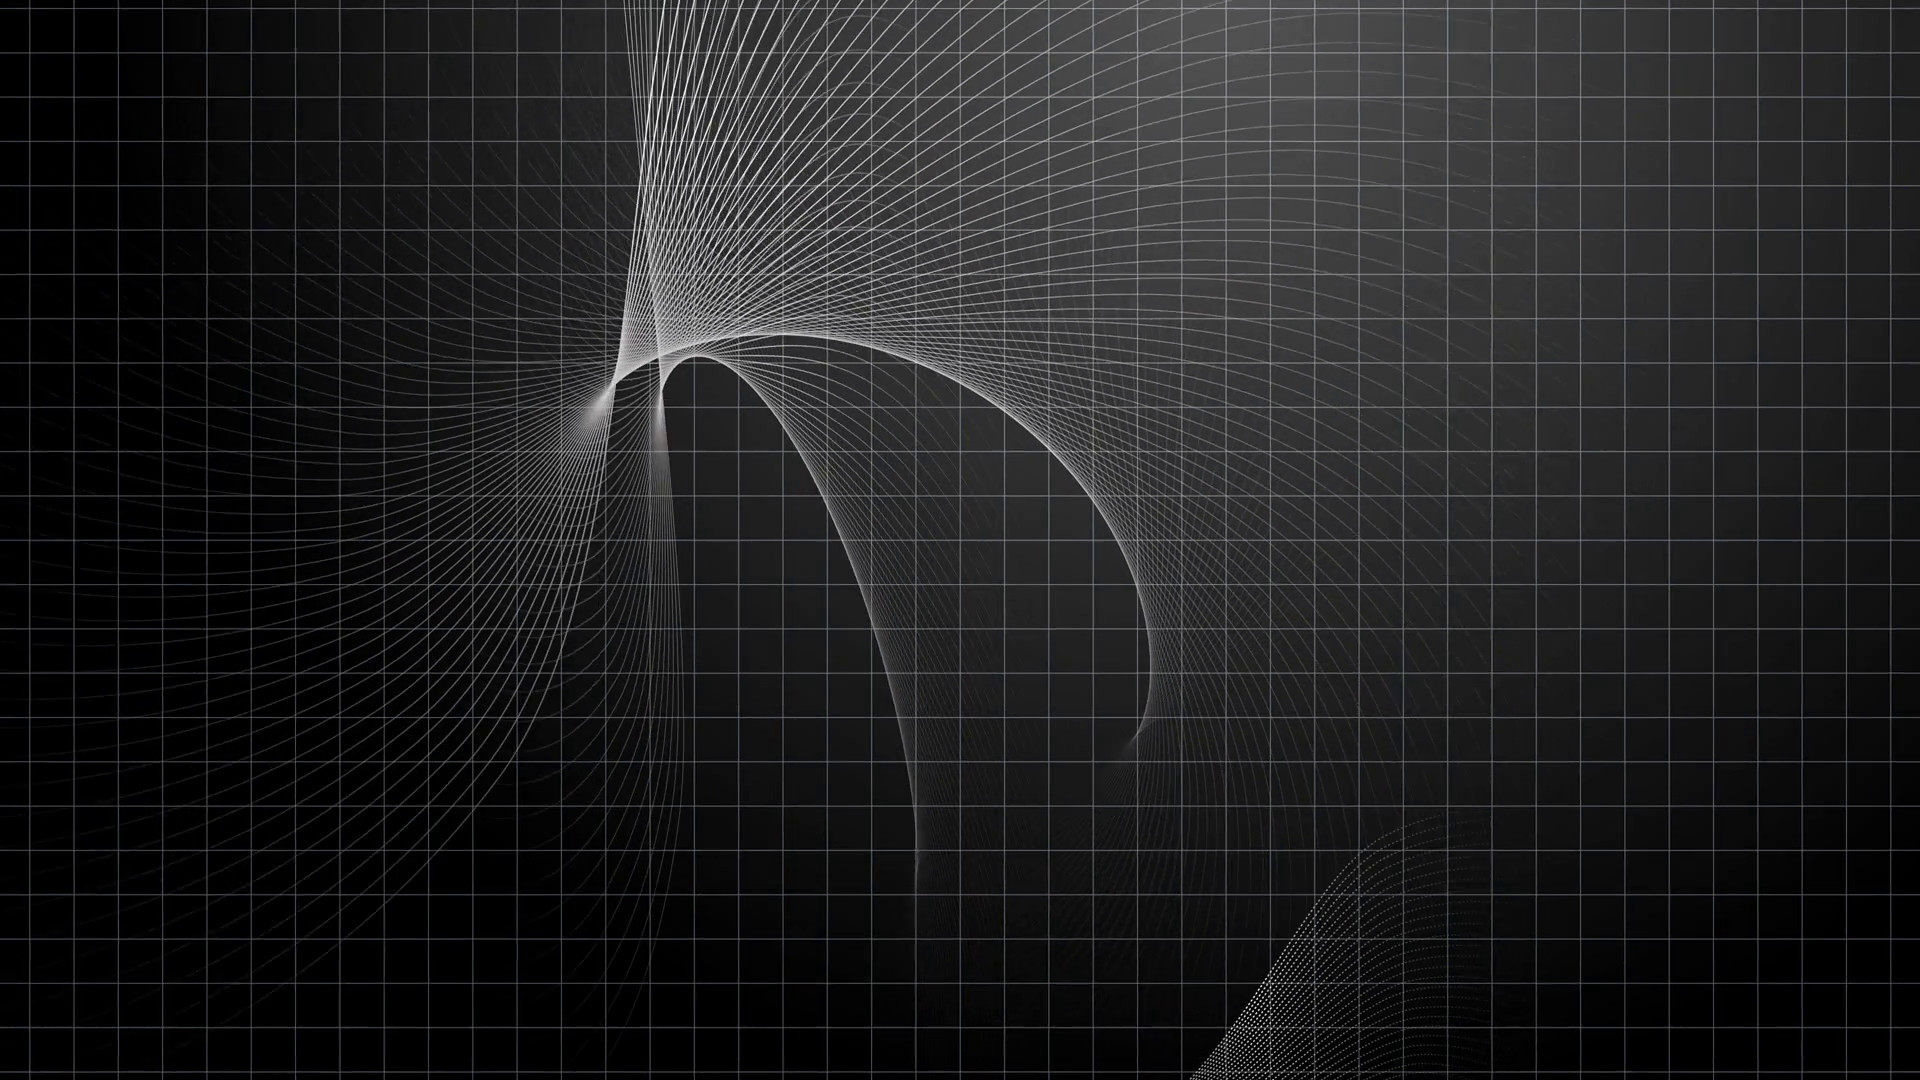 1920x1080 Abstract geometric dark gray background with moving curves on transparent  grid. Concept of interaction and technologies orchestration.